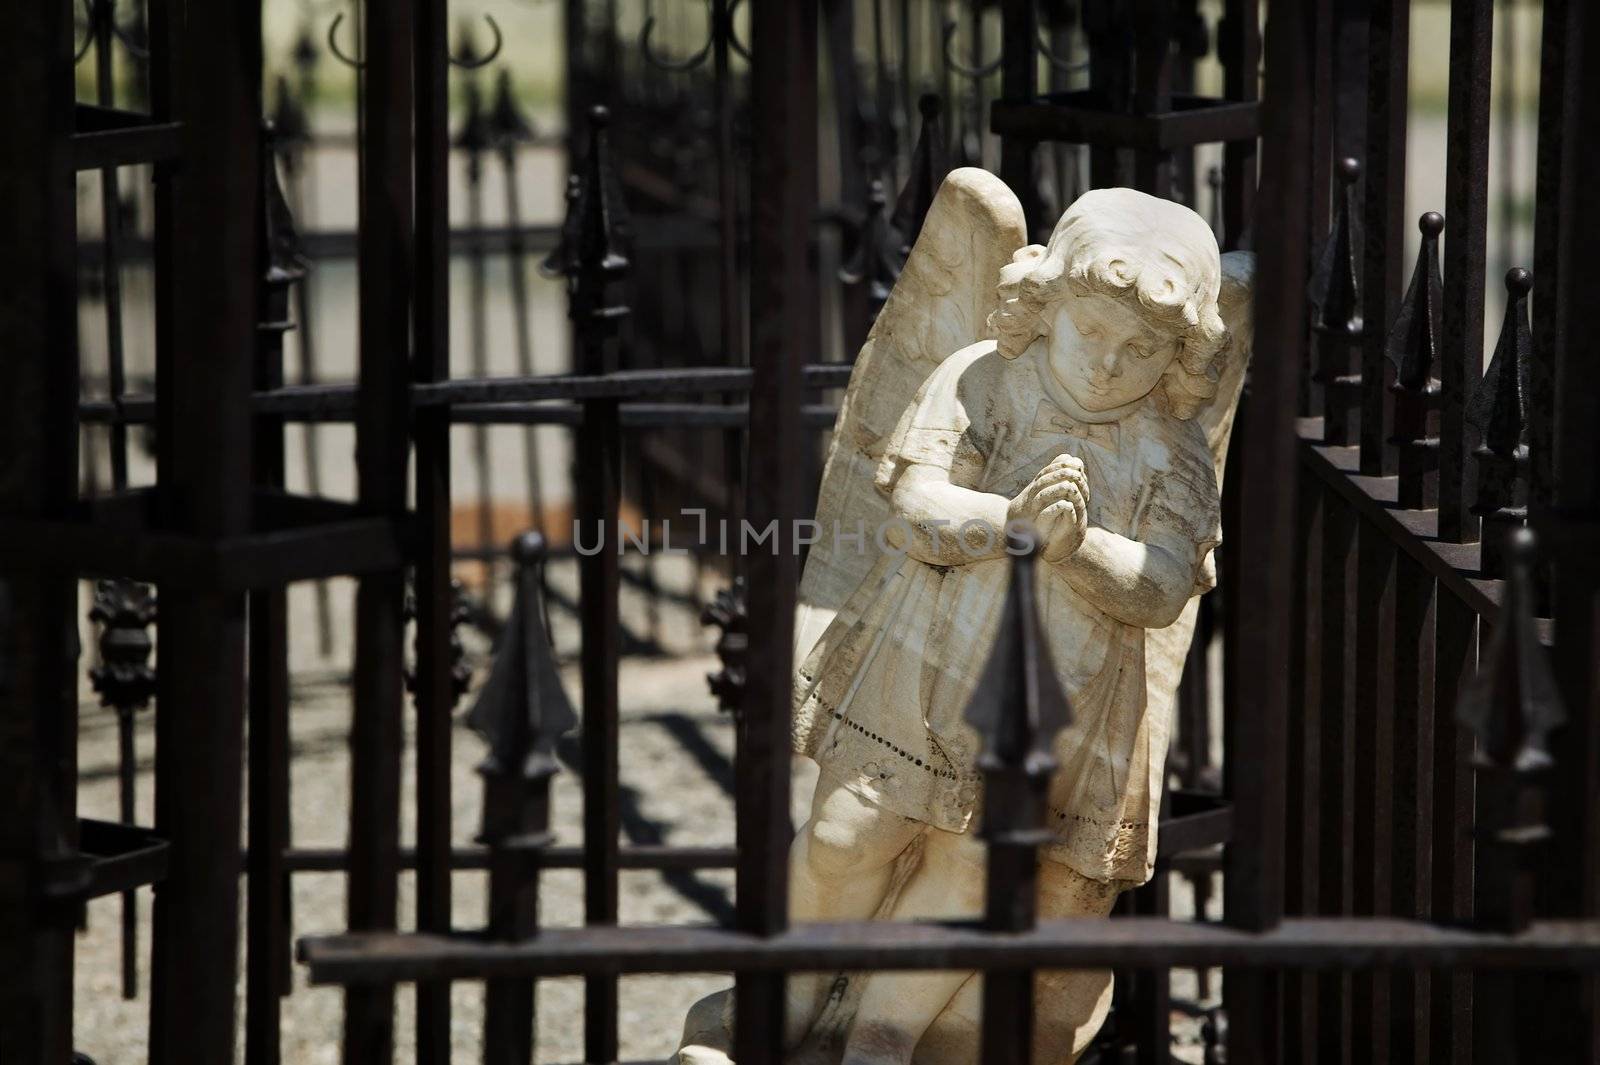 Angel behind wrought iron bars by Creatista